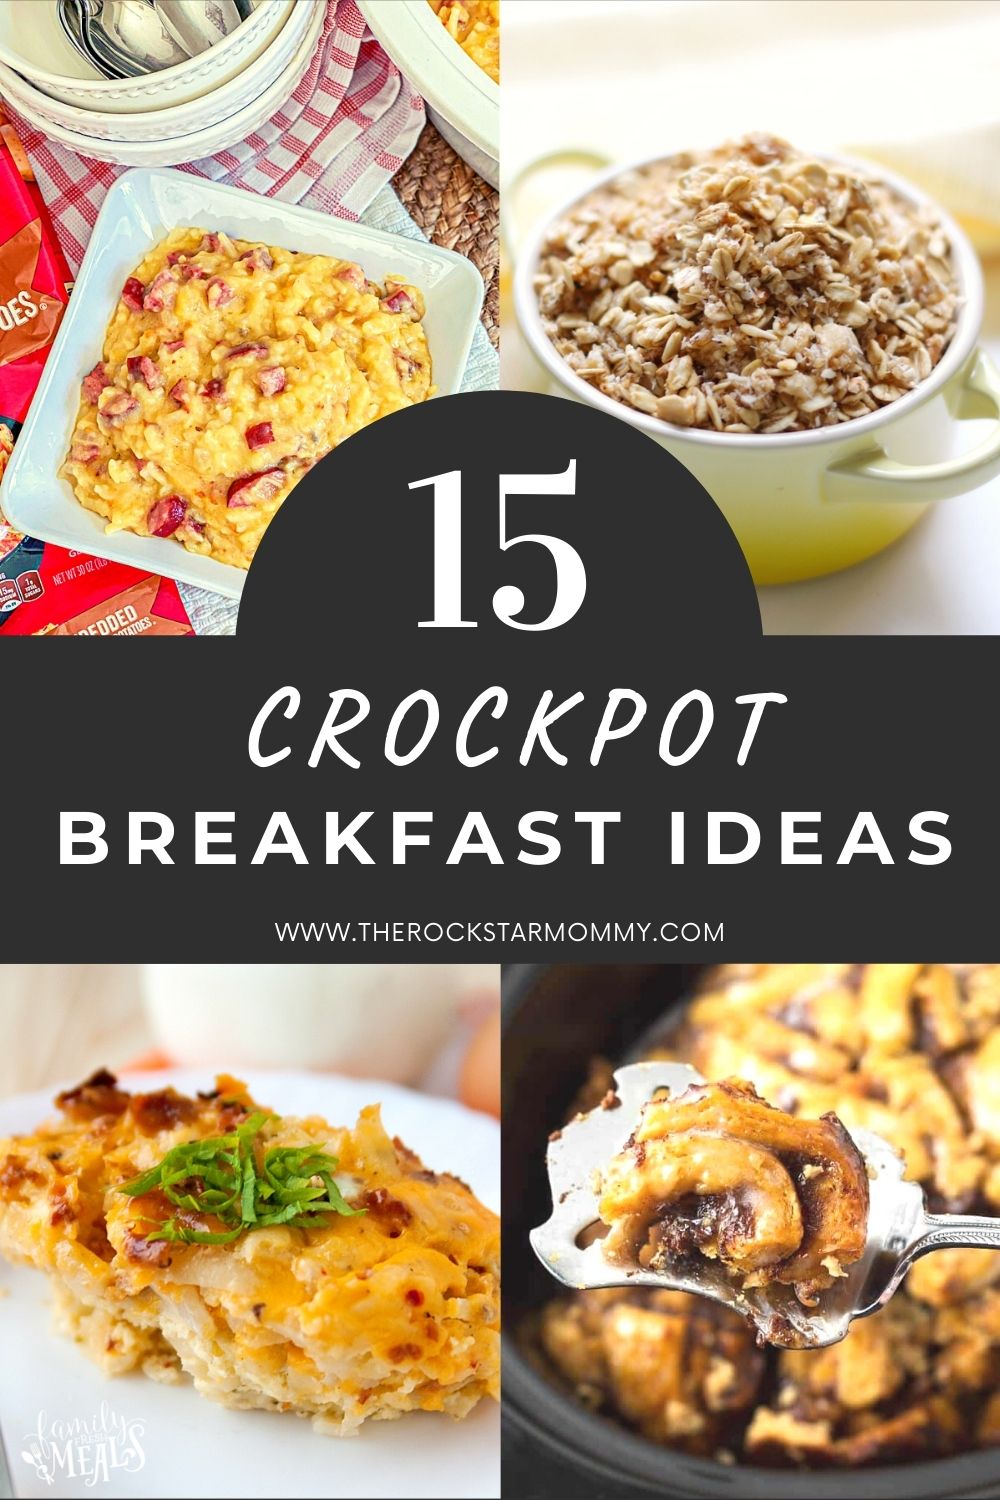 Collage image showing 4 crockpot breakfast recipes